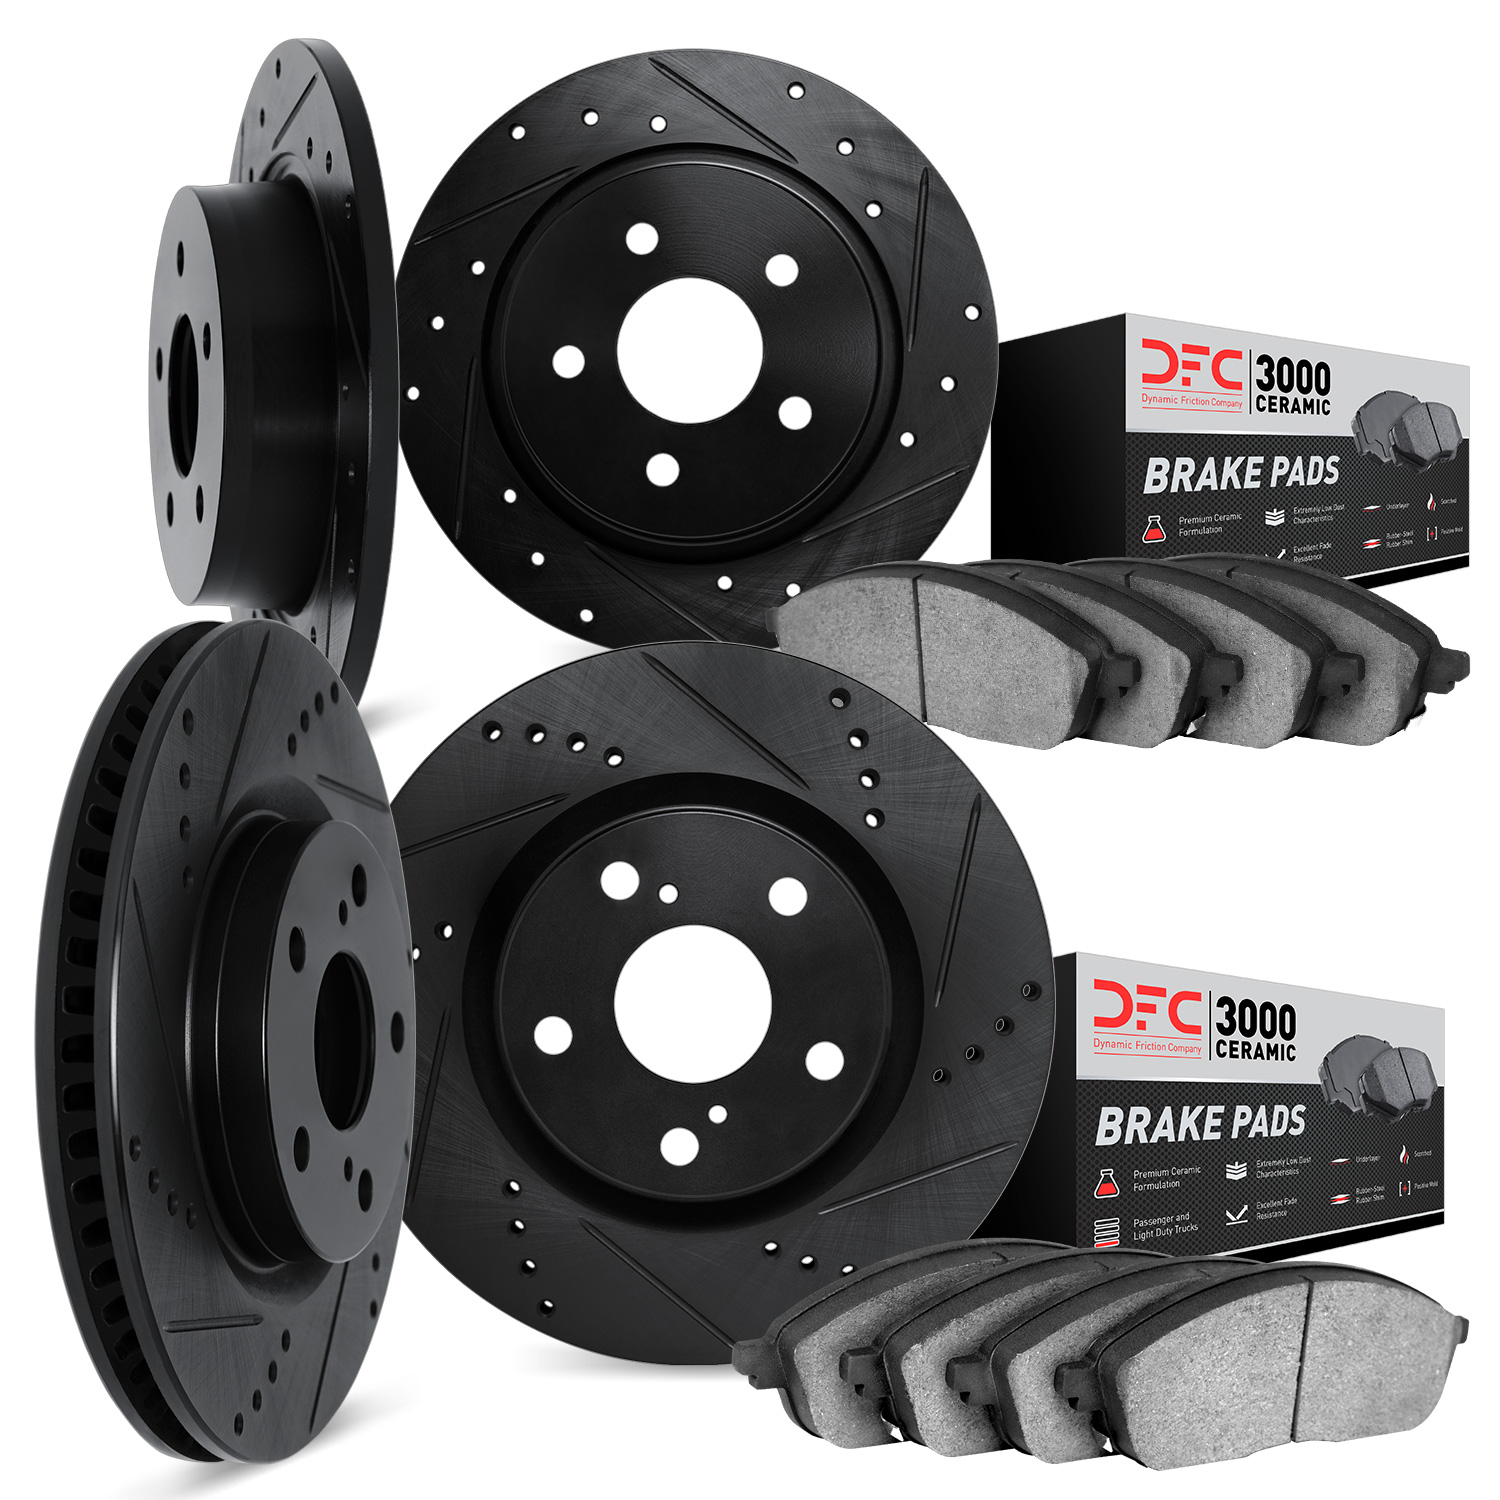 8304-13021 Drilled/Slotted Brake Rotors with 3000-Series Ceramic Brake Pads Kit [Black], 2003-2003 Subaru, Position: Front and R